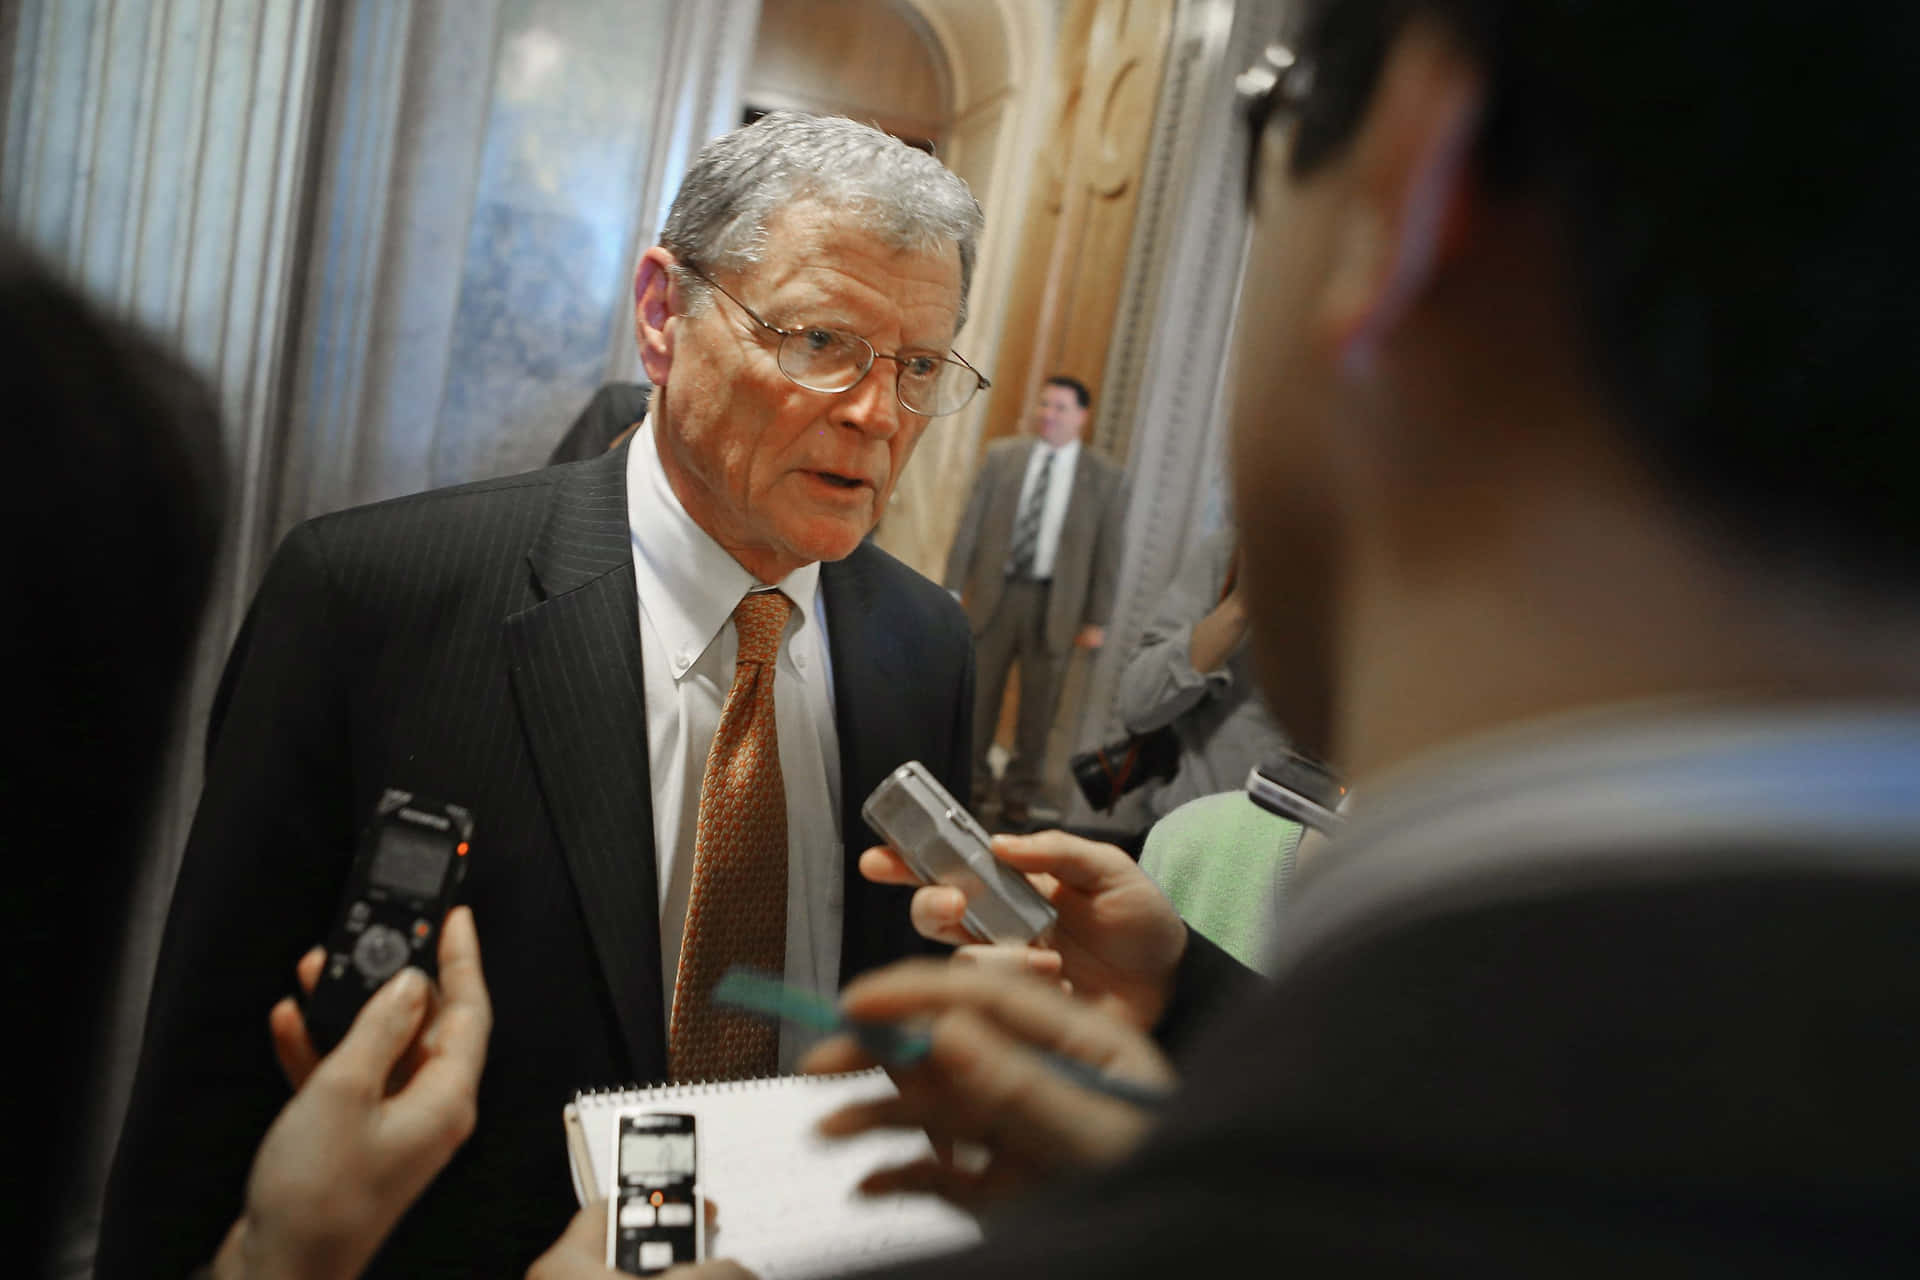 Jim Inhofe Surrounded By Interviewers Wallpaper